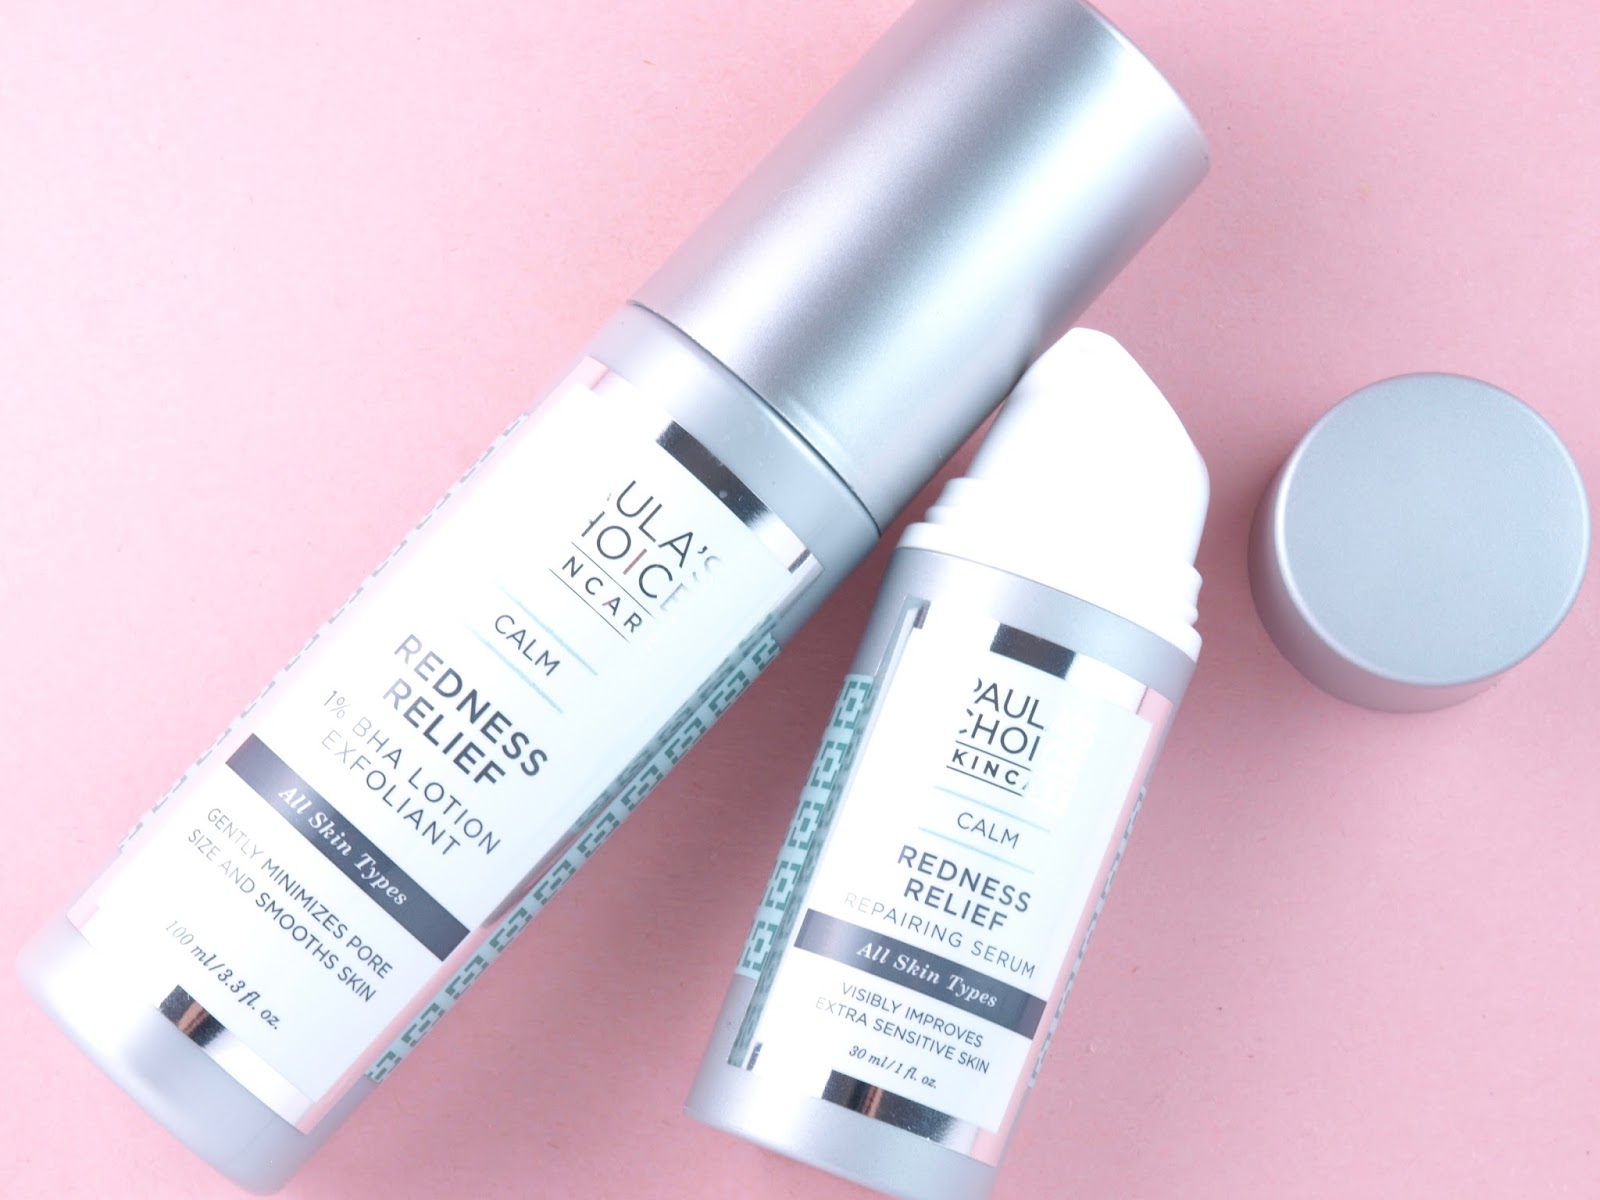 Choice NEW Calm Collection: Review | Happy Sloths: Beauty, Makeup, and Skincare Blog with and Swatches